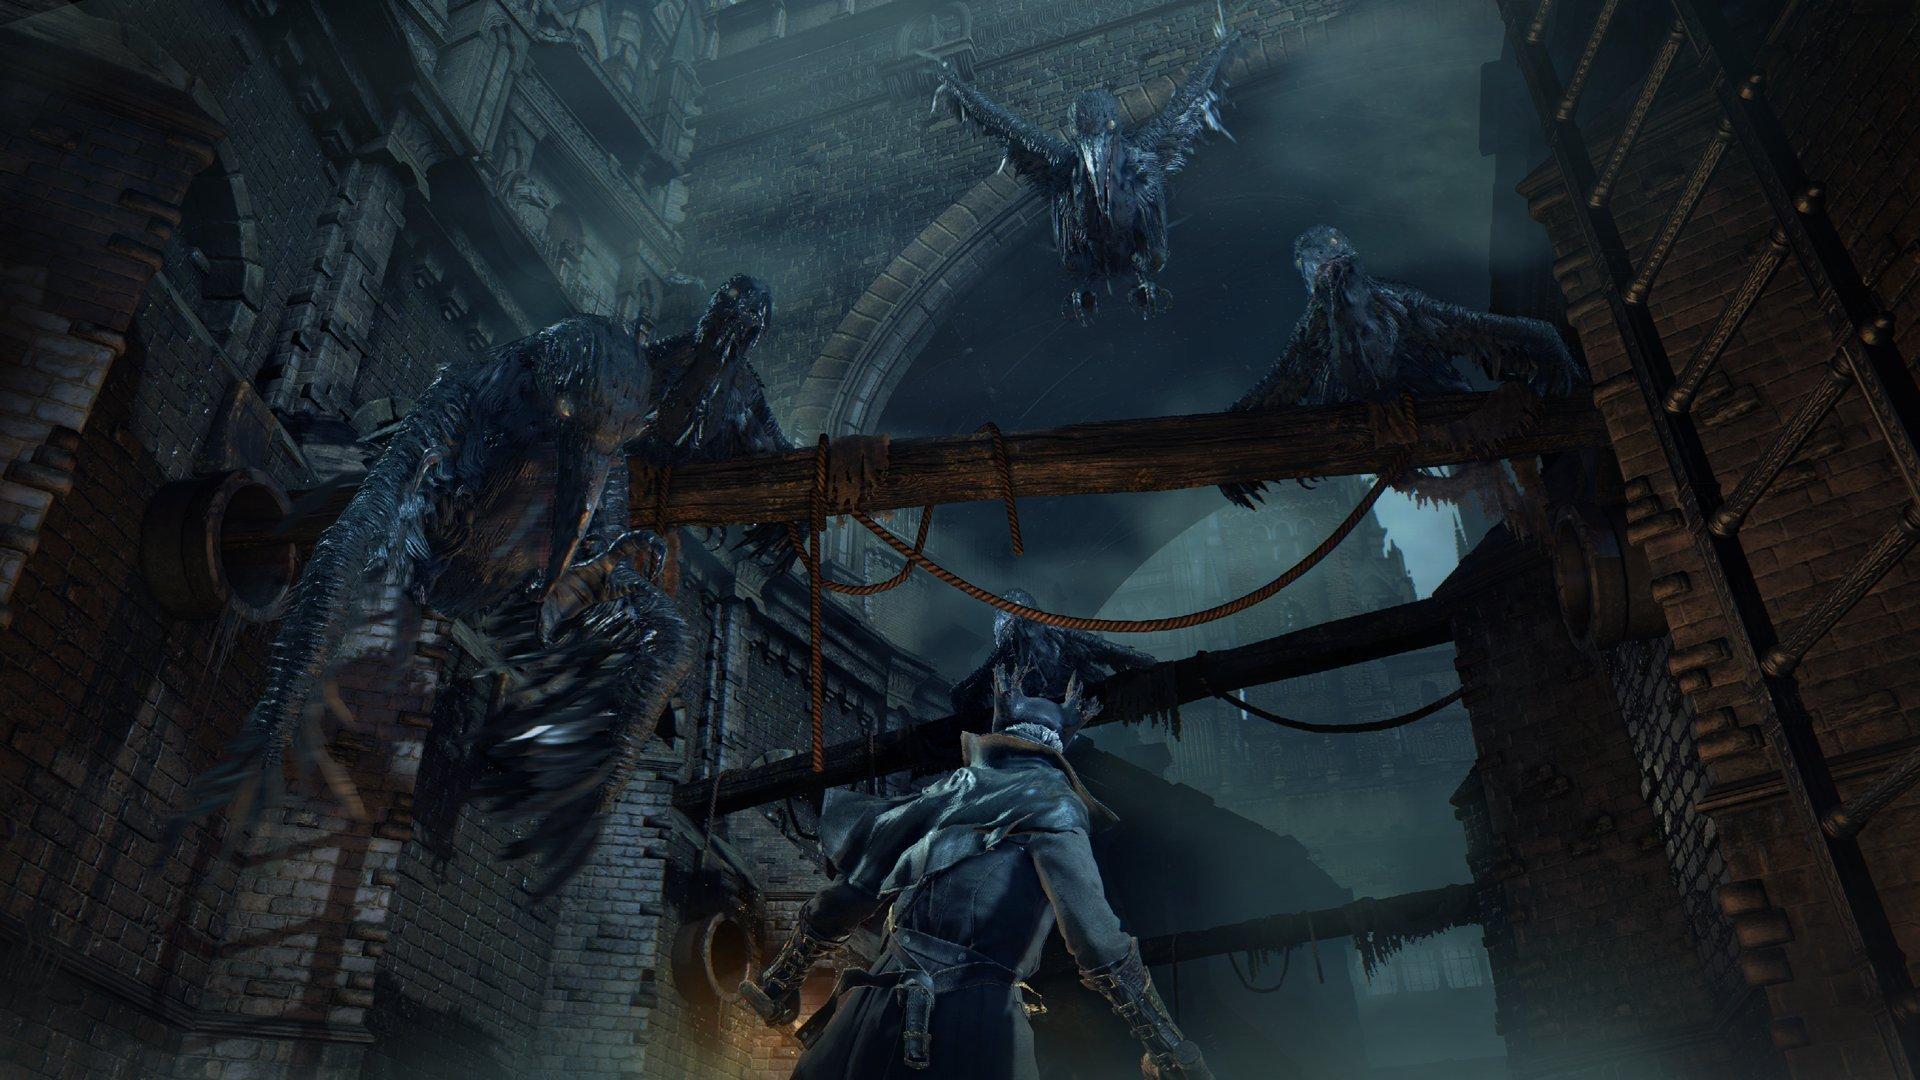 A PS4 Emulator Boots Bloodborne on PC